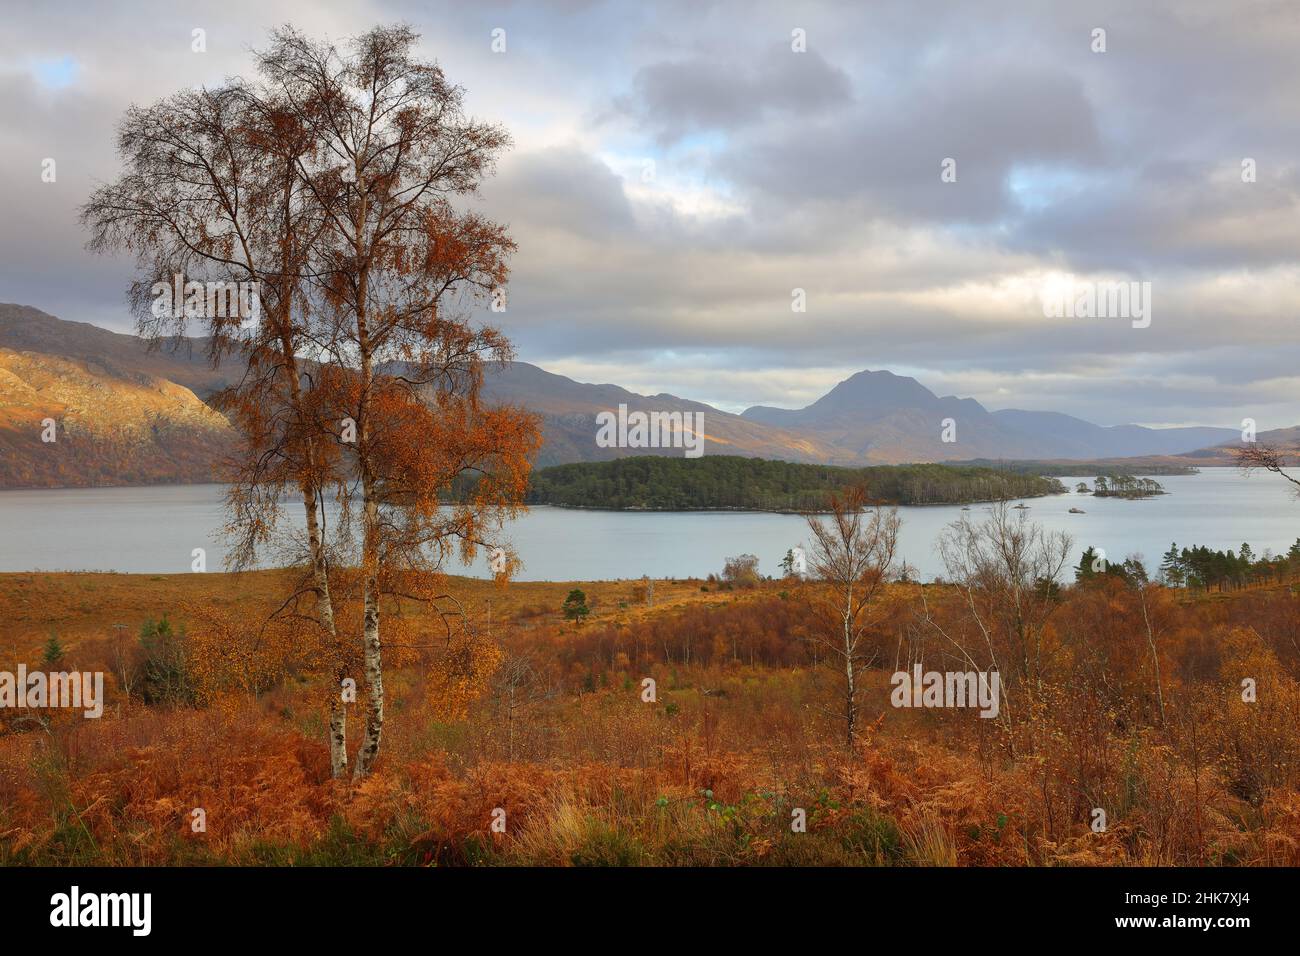 Silver Birch Tree with Loch Maree in the distance. North West Highlands, Scotland, UK. Stock Photo